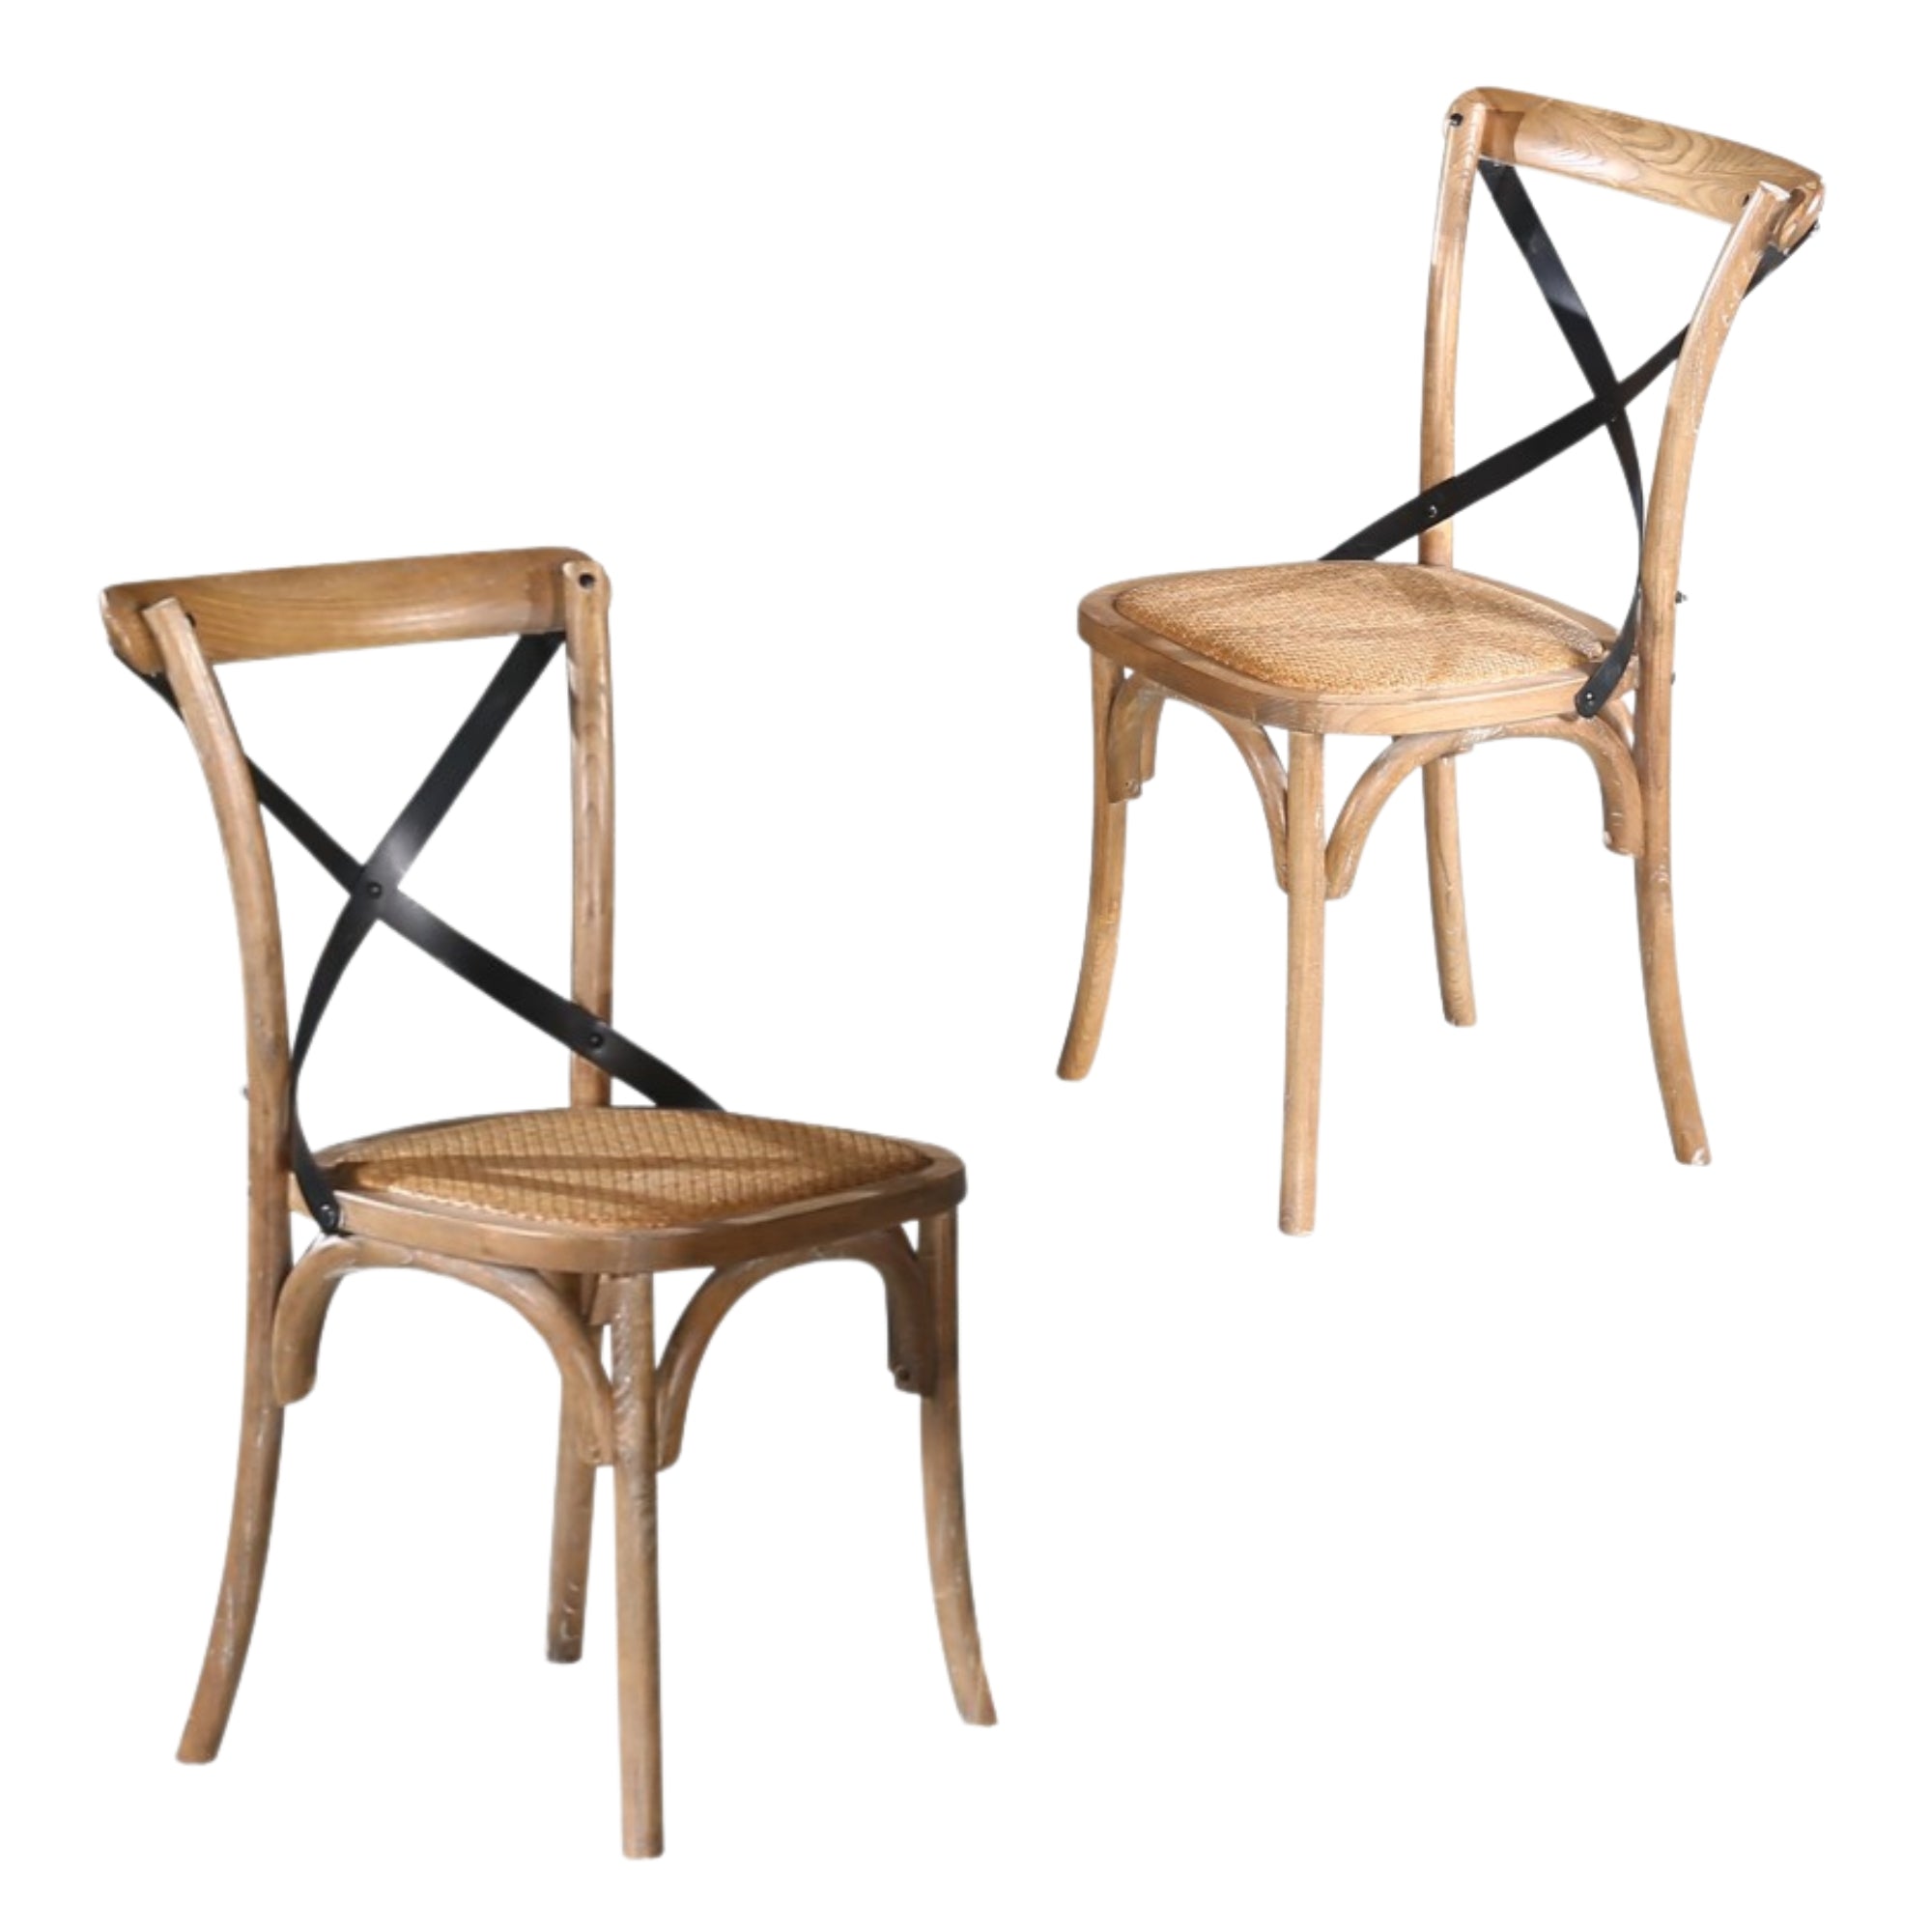 2pc Natural Refectory Style Dining Chairs, Birchwood, Woven Seat